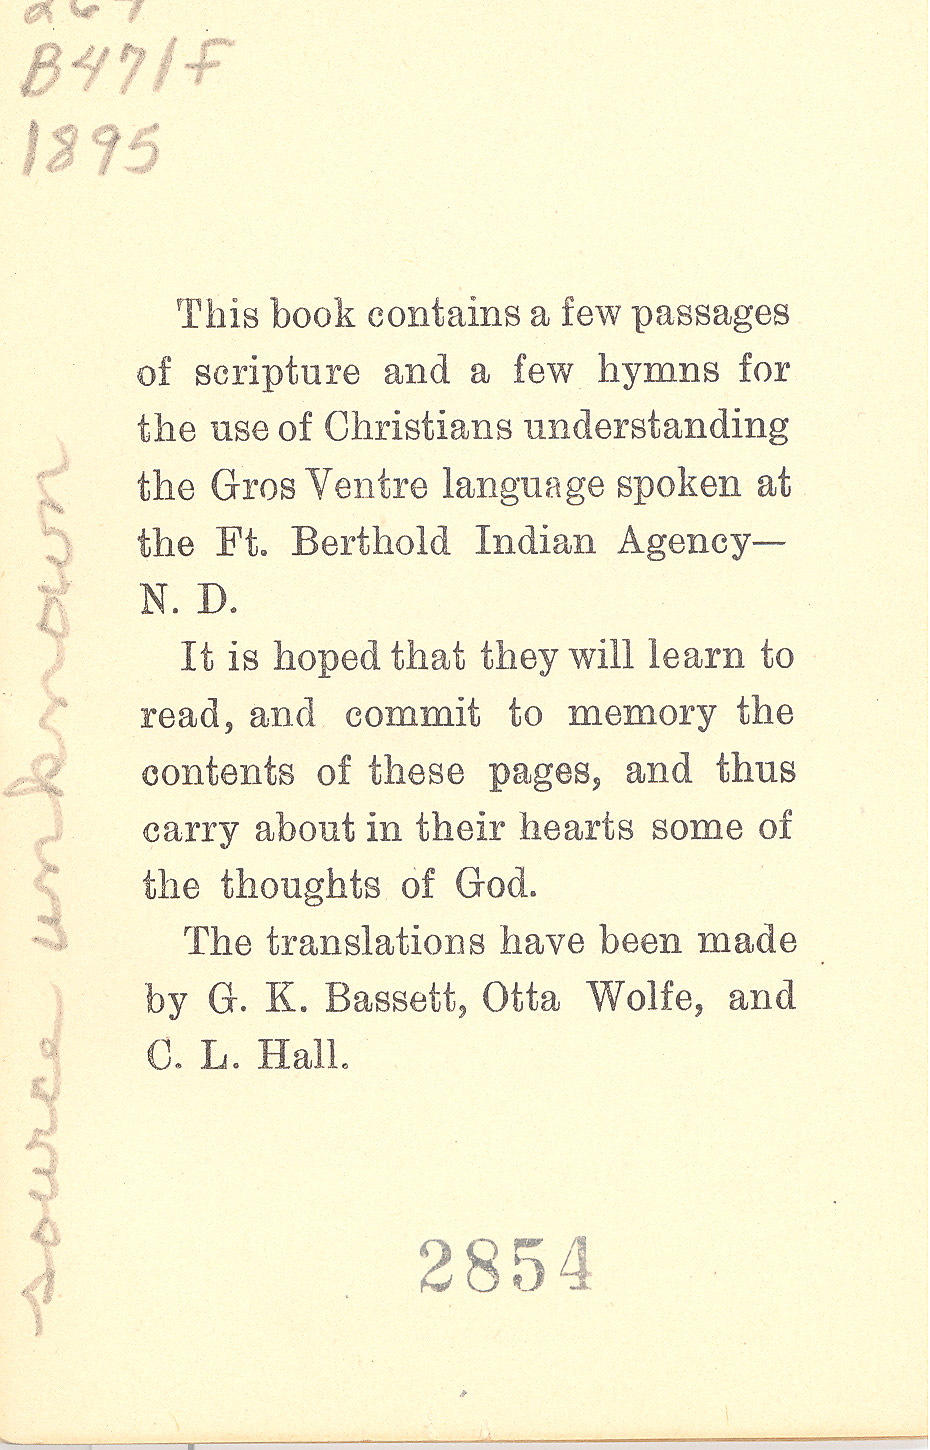 Hidatsa Hymns. The Reverend Hall and members of his staff collaborated with interpreters to translate Christian Hymns and prayers into Hidatsa (Gros Ventre) language. As the missionaries learned the language and translated the religious hymns from English into Hidatsa, they also preserved the language of the Hidatsas.